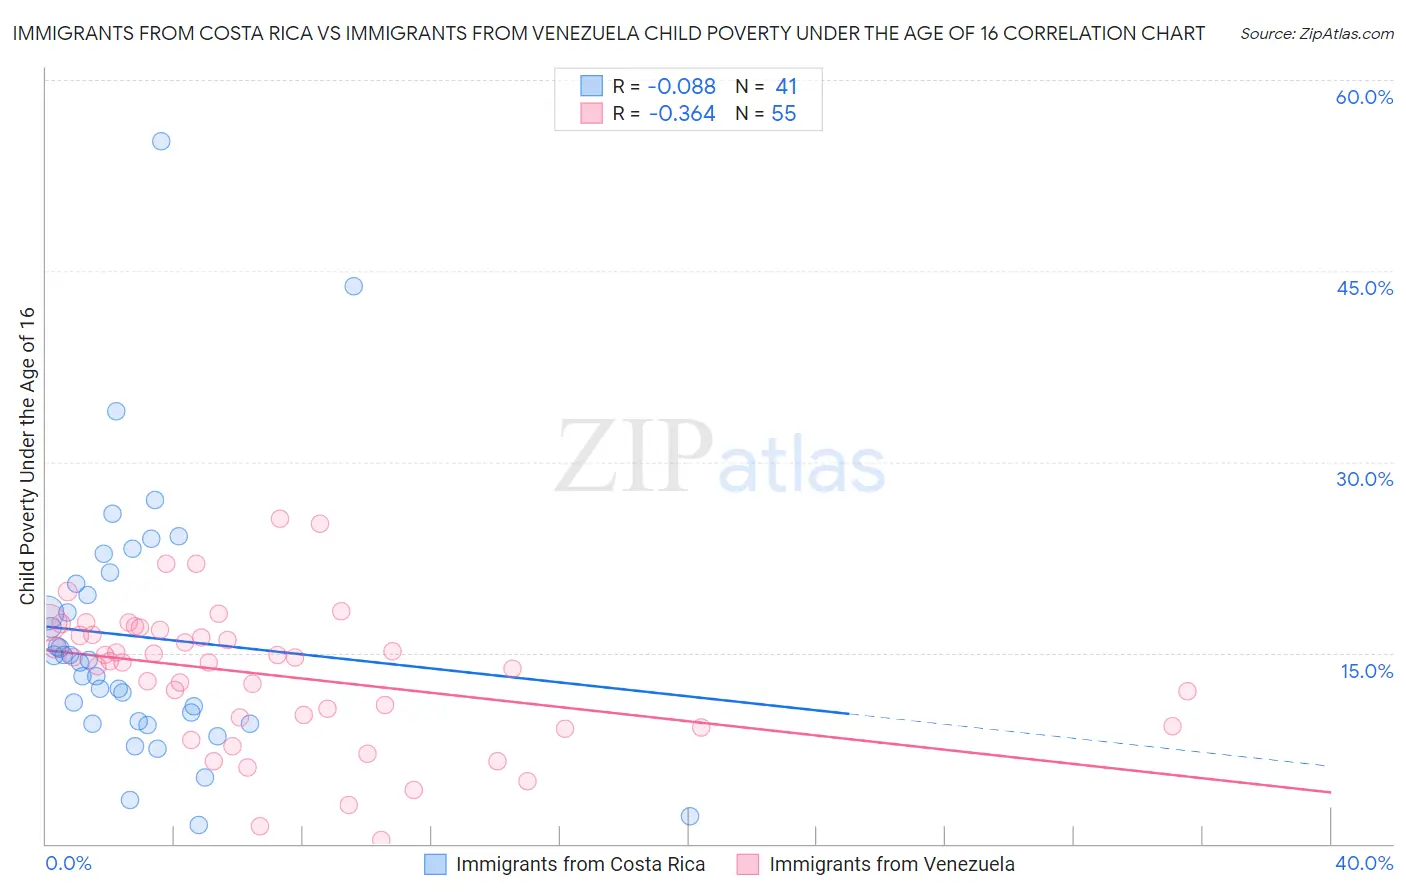 Immigrants from Costa Rica vs Immigrants from Venezuela Child Poverty Under the Age of 16